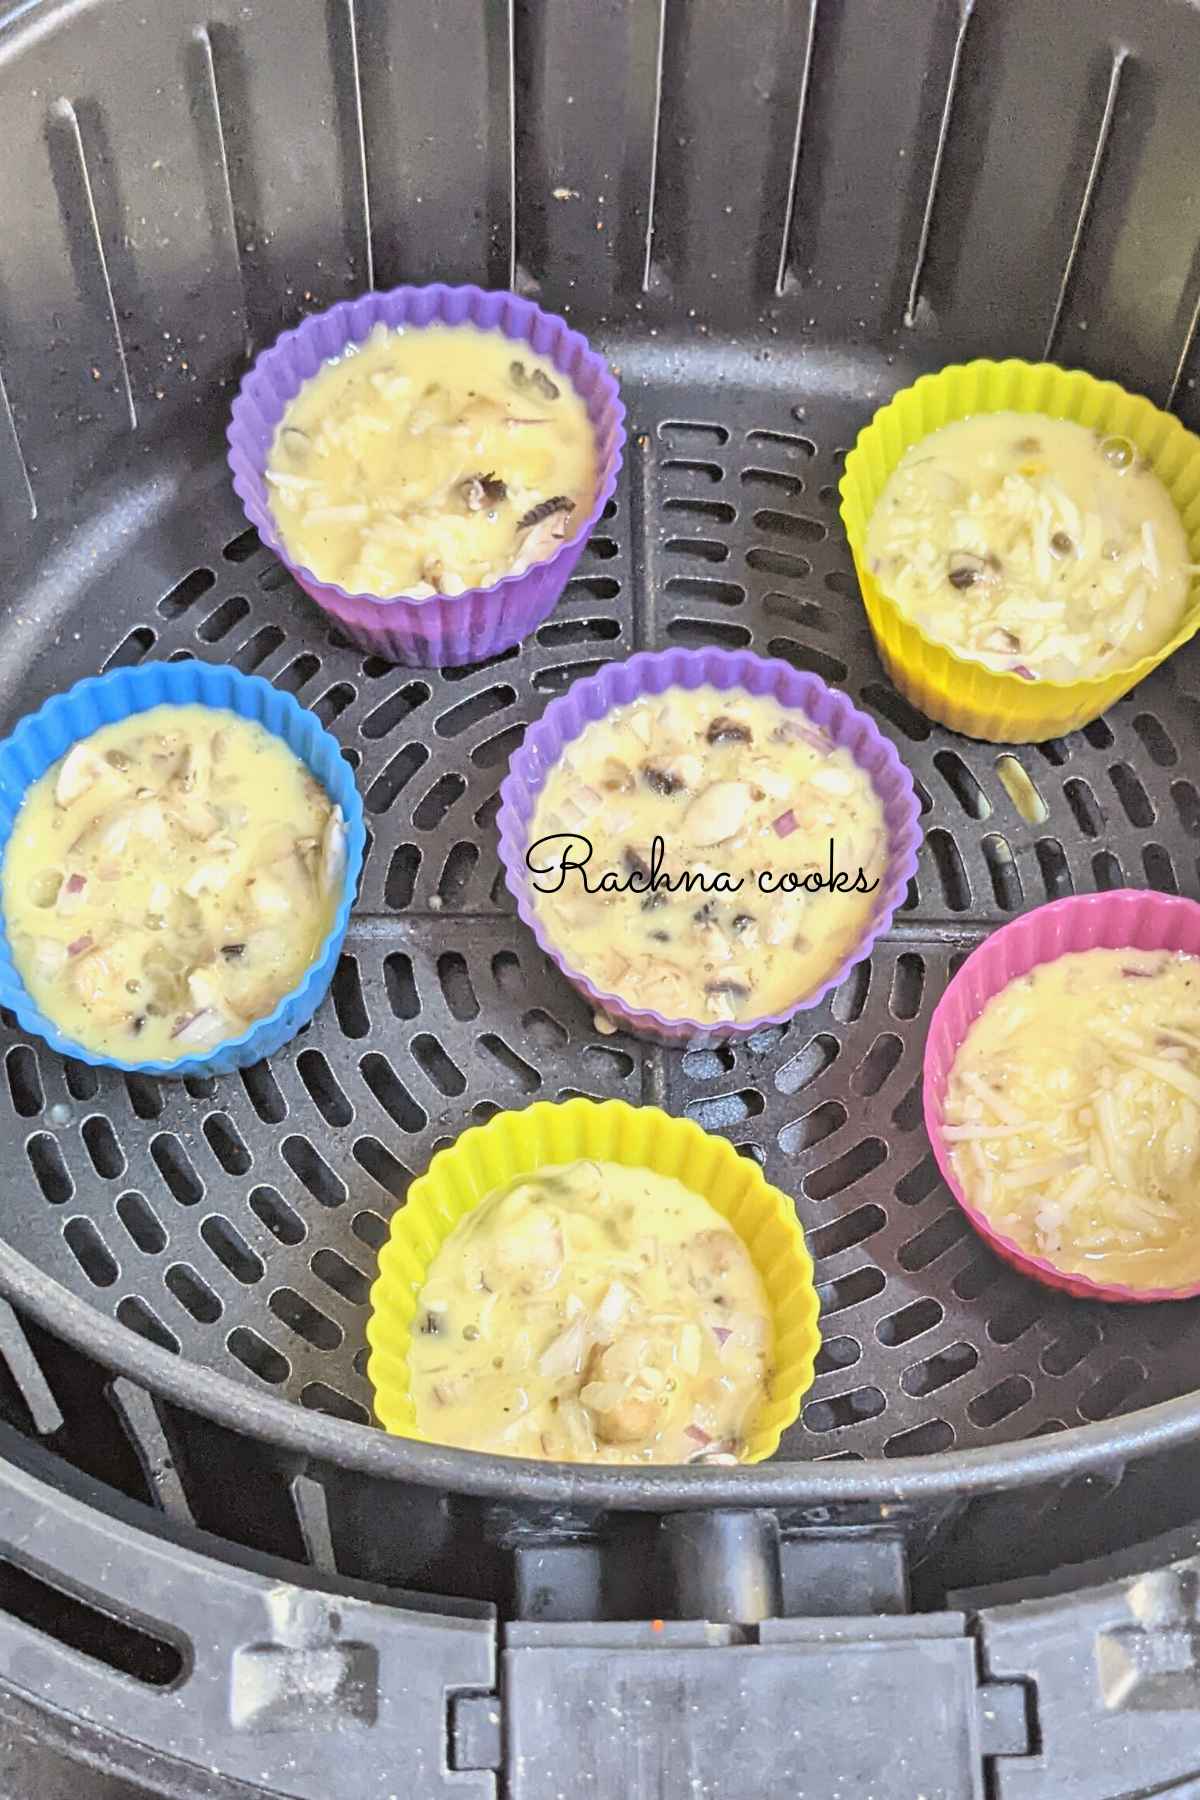 6 egg bite mix in silicone moulds in air fryer basket.